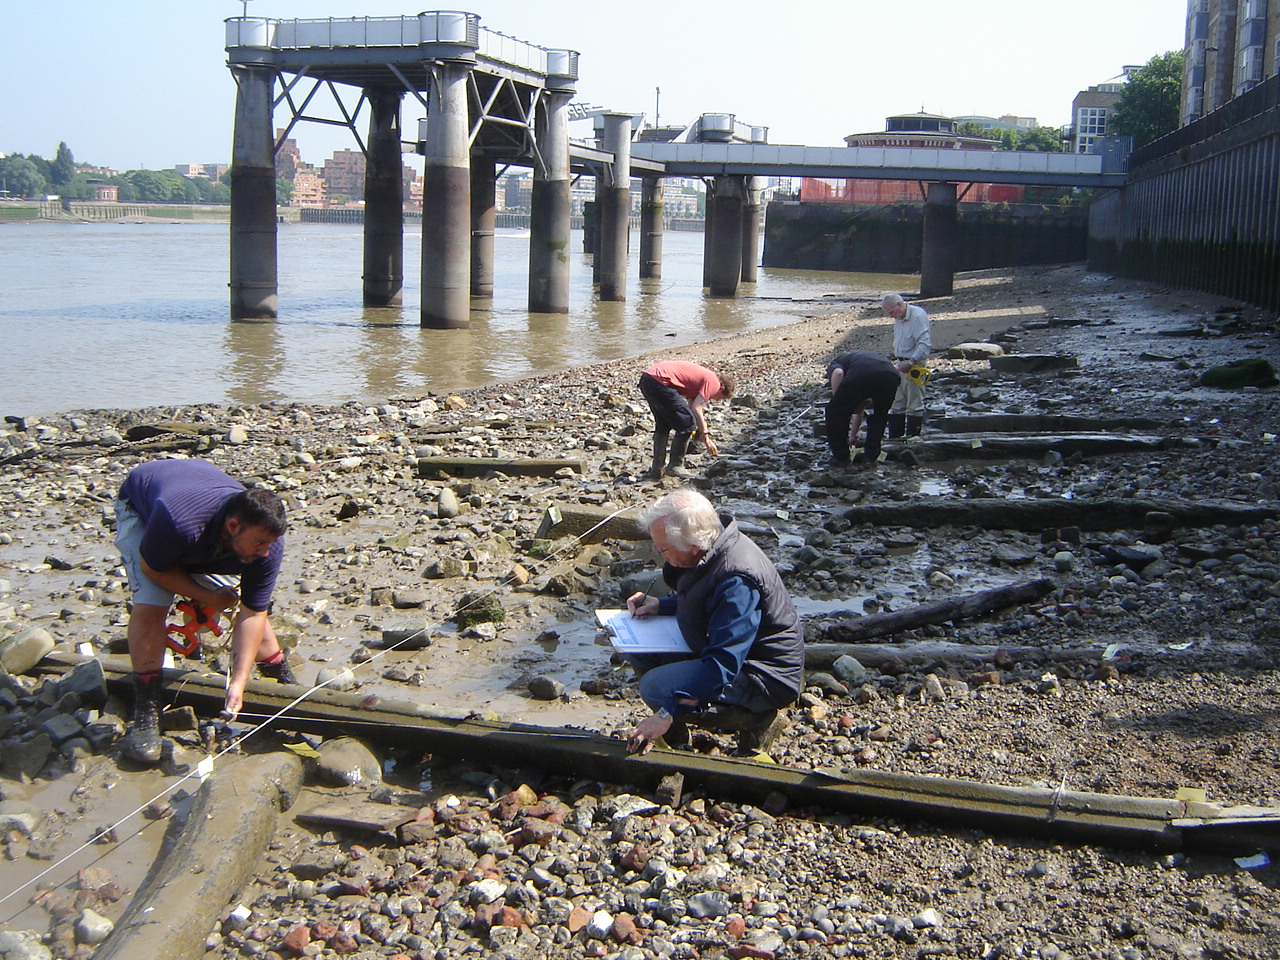 Intertidal Surveying on the River Thames